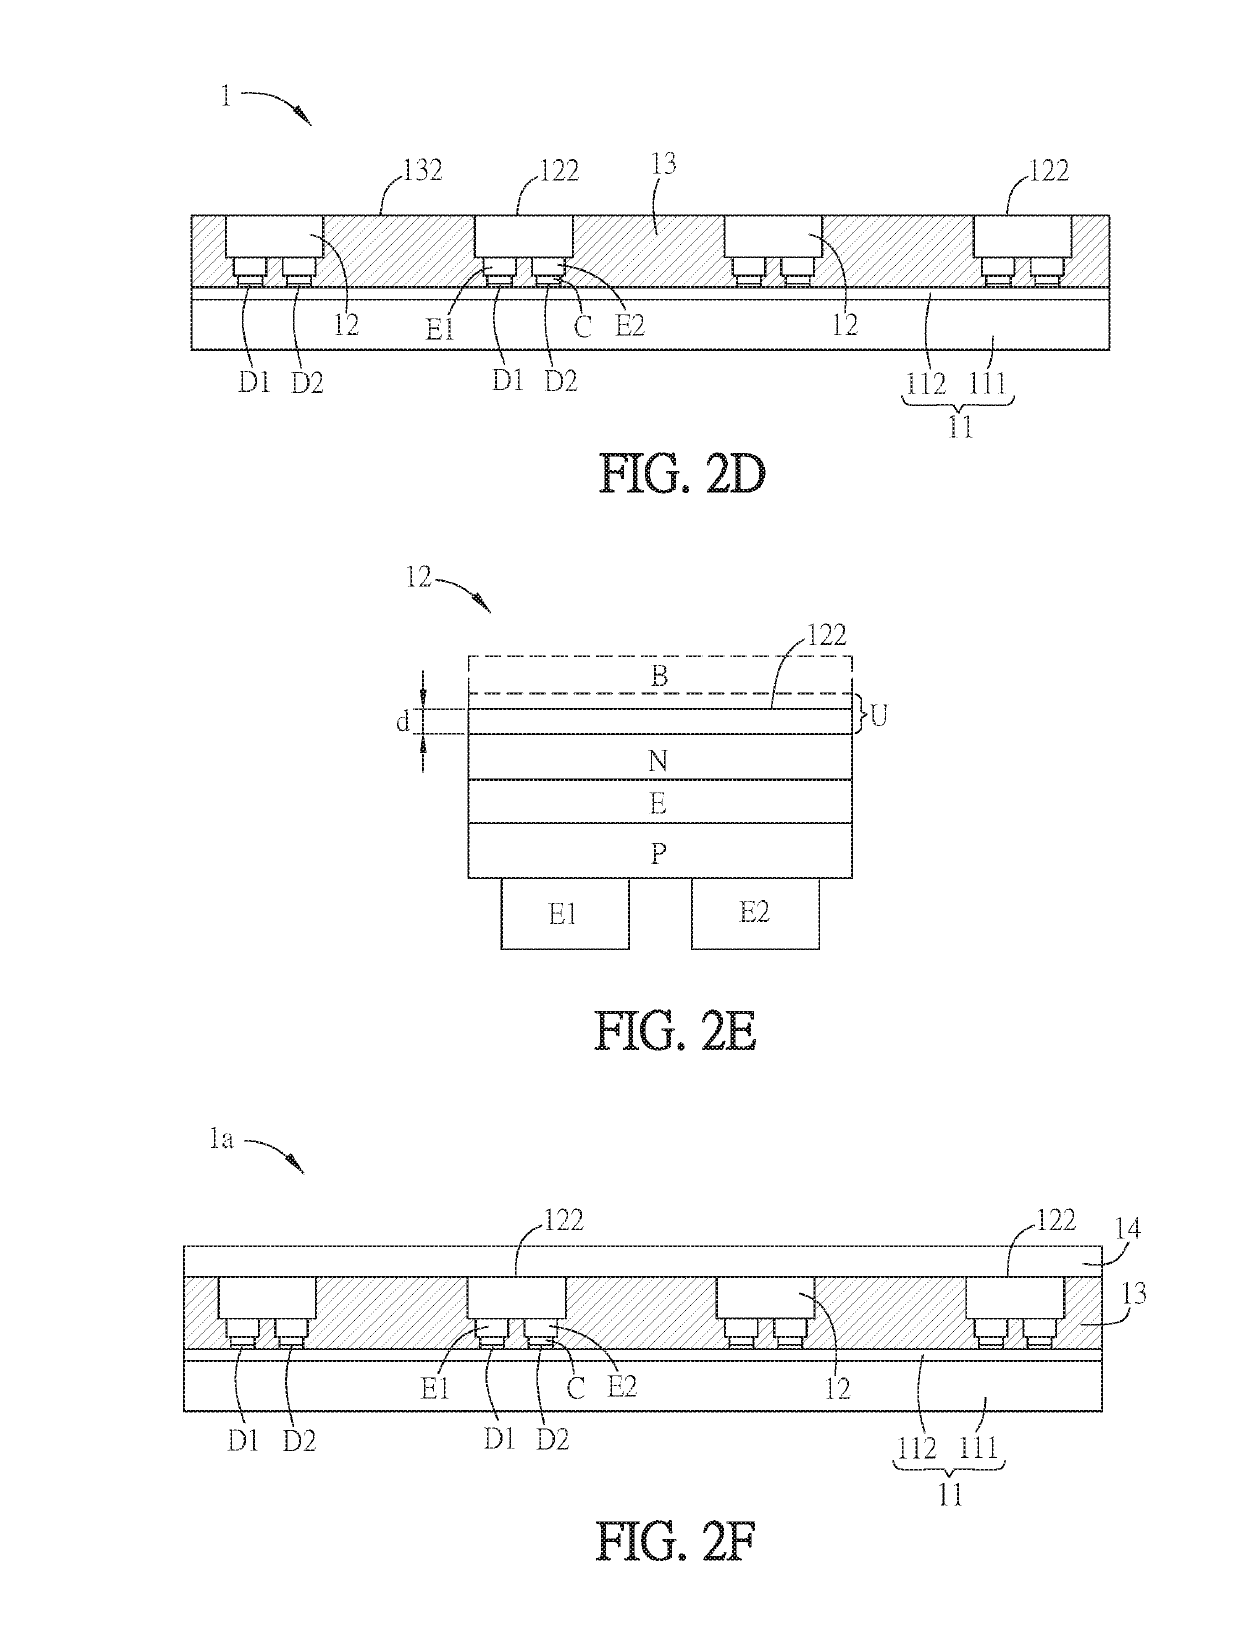 Manufacturing method of optoelectronic semiconductor device